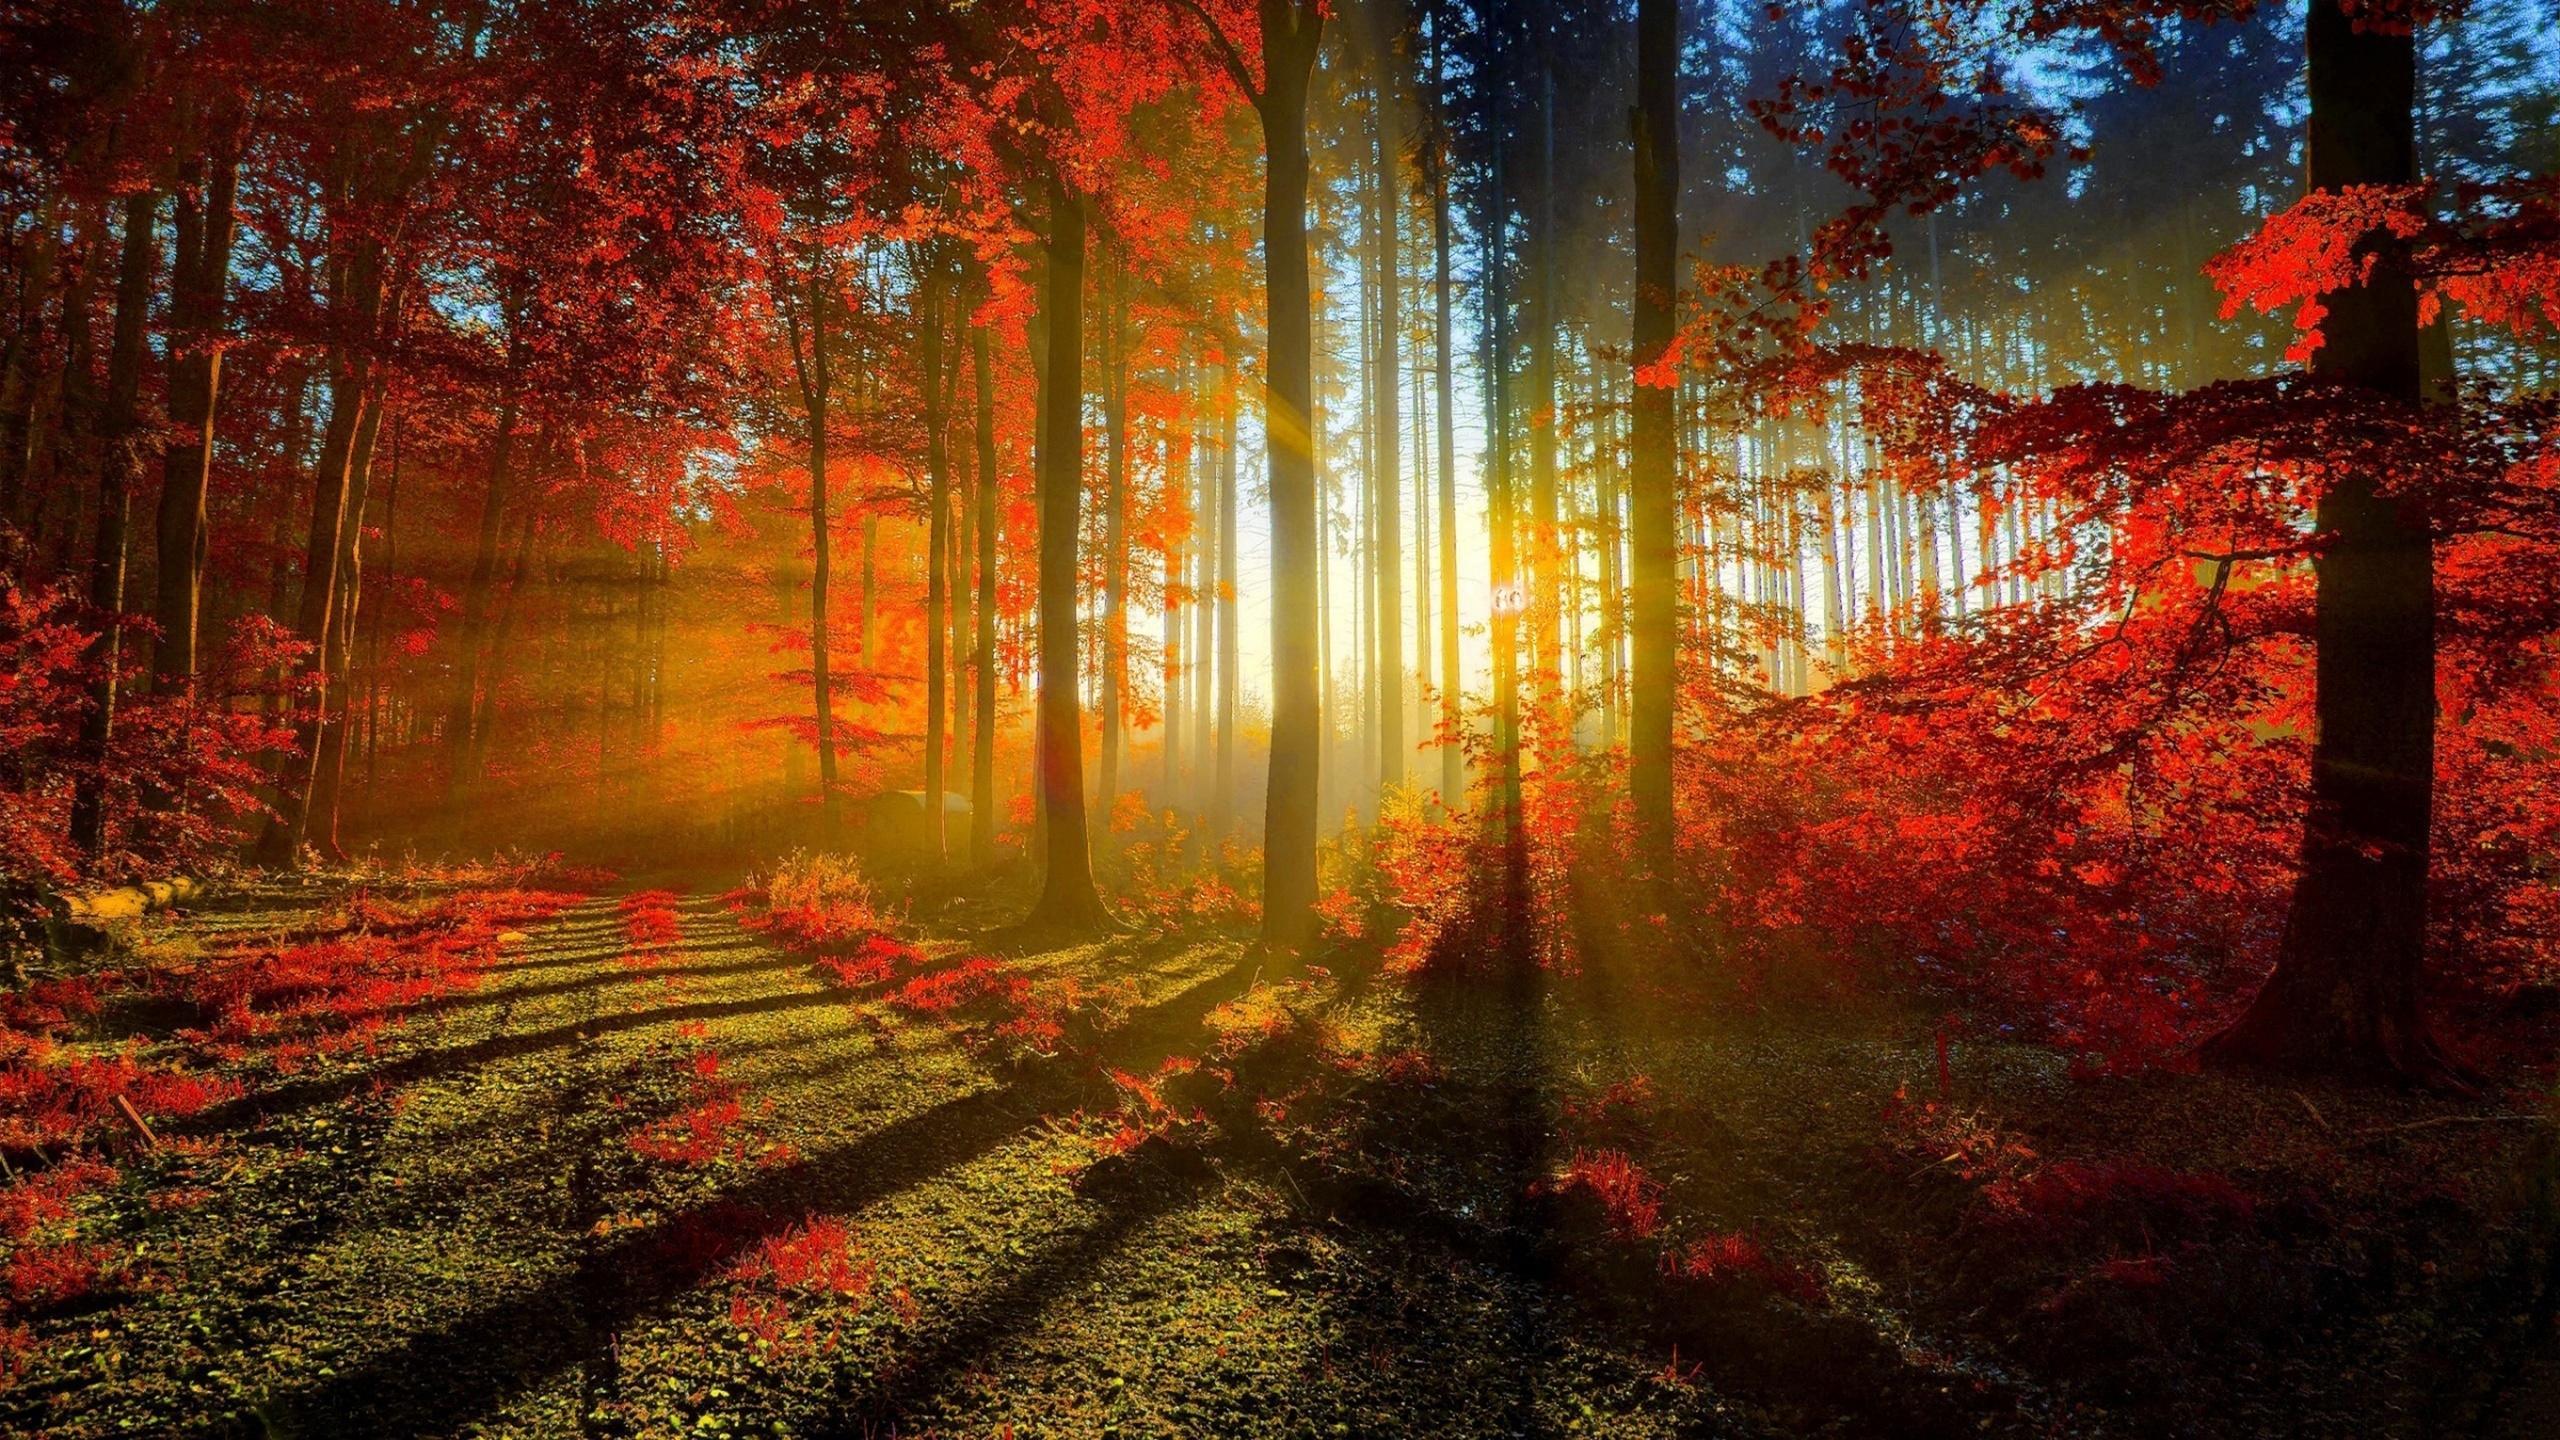 Download 2560x1440 Autumn, Sunrays, Trees, Forest, Fall Wallpaper